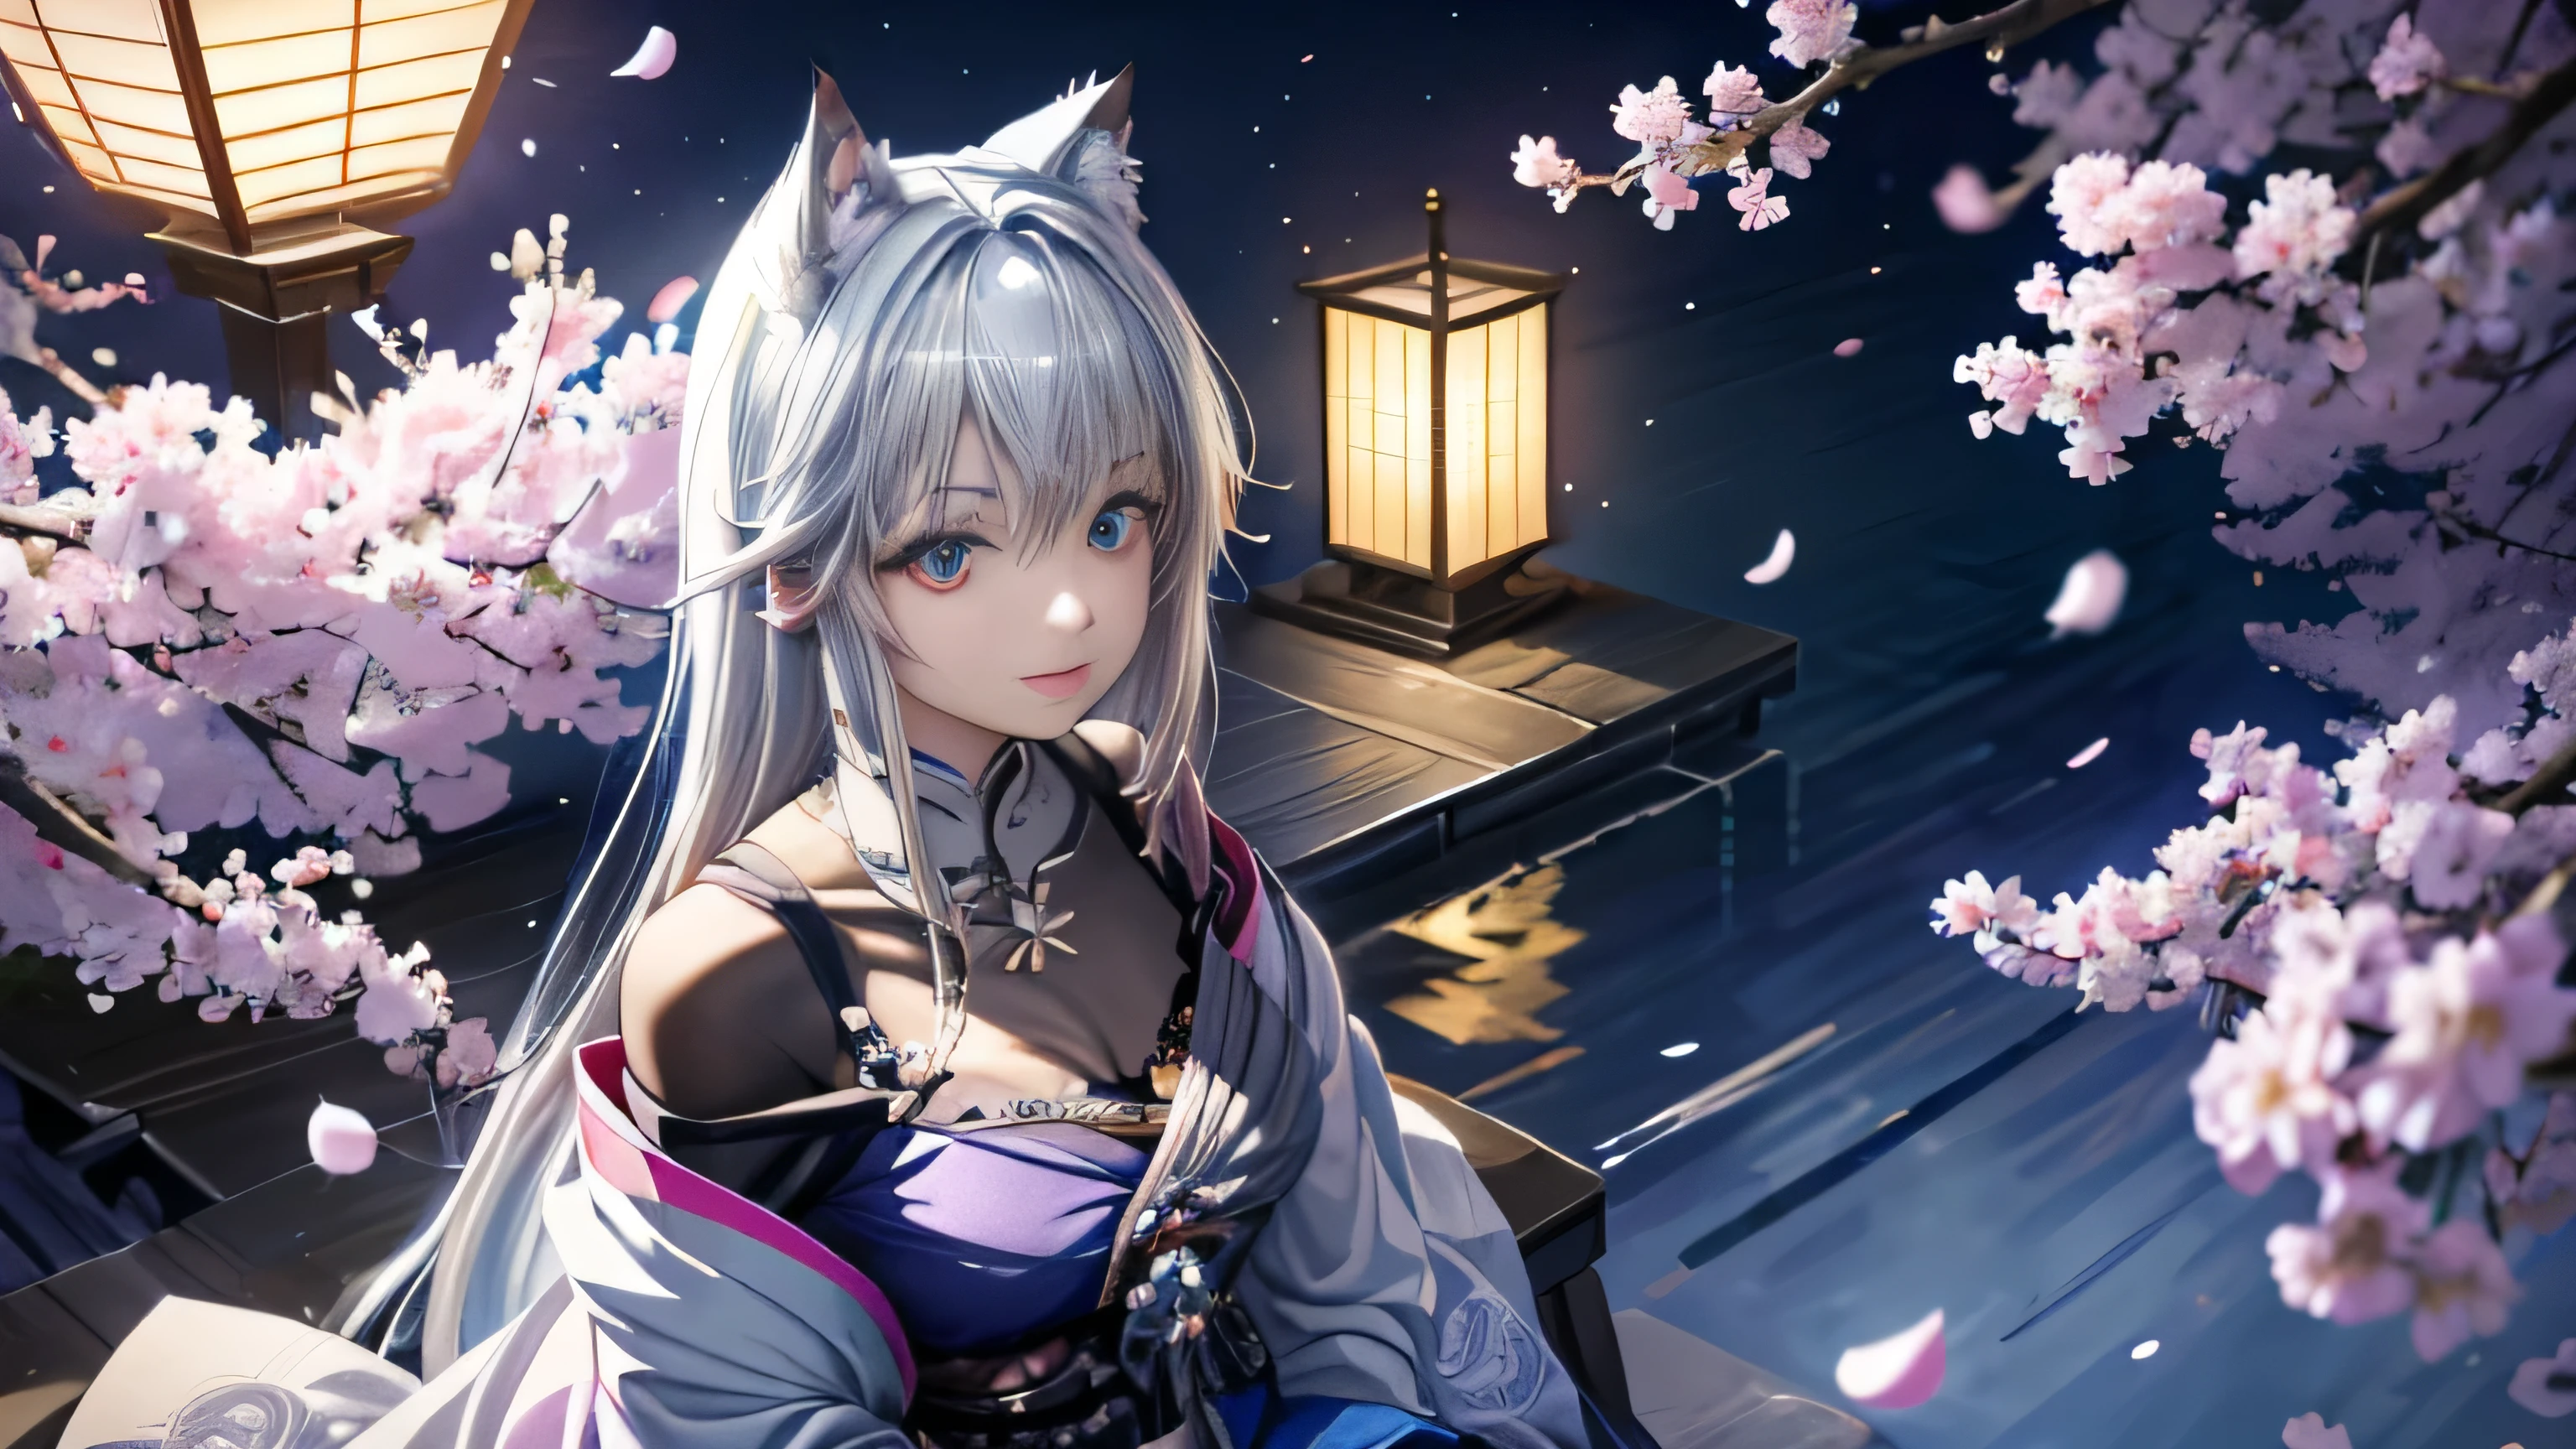 anime, one girl, colorful hair,Silver hair and light blue hair、 Hair is tangled, light blue eyes, Kyoto, cherry blossoms、petal、moon, Kimono with light blue pattern, off shoulder, sitting, alone,cleavage、smile